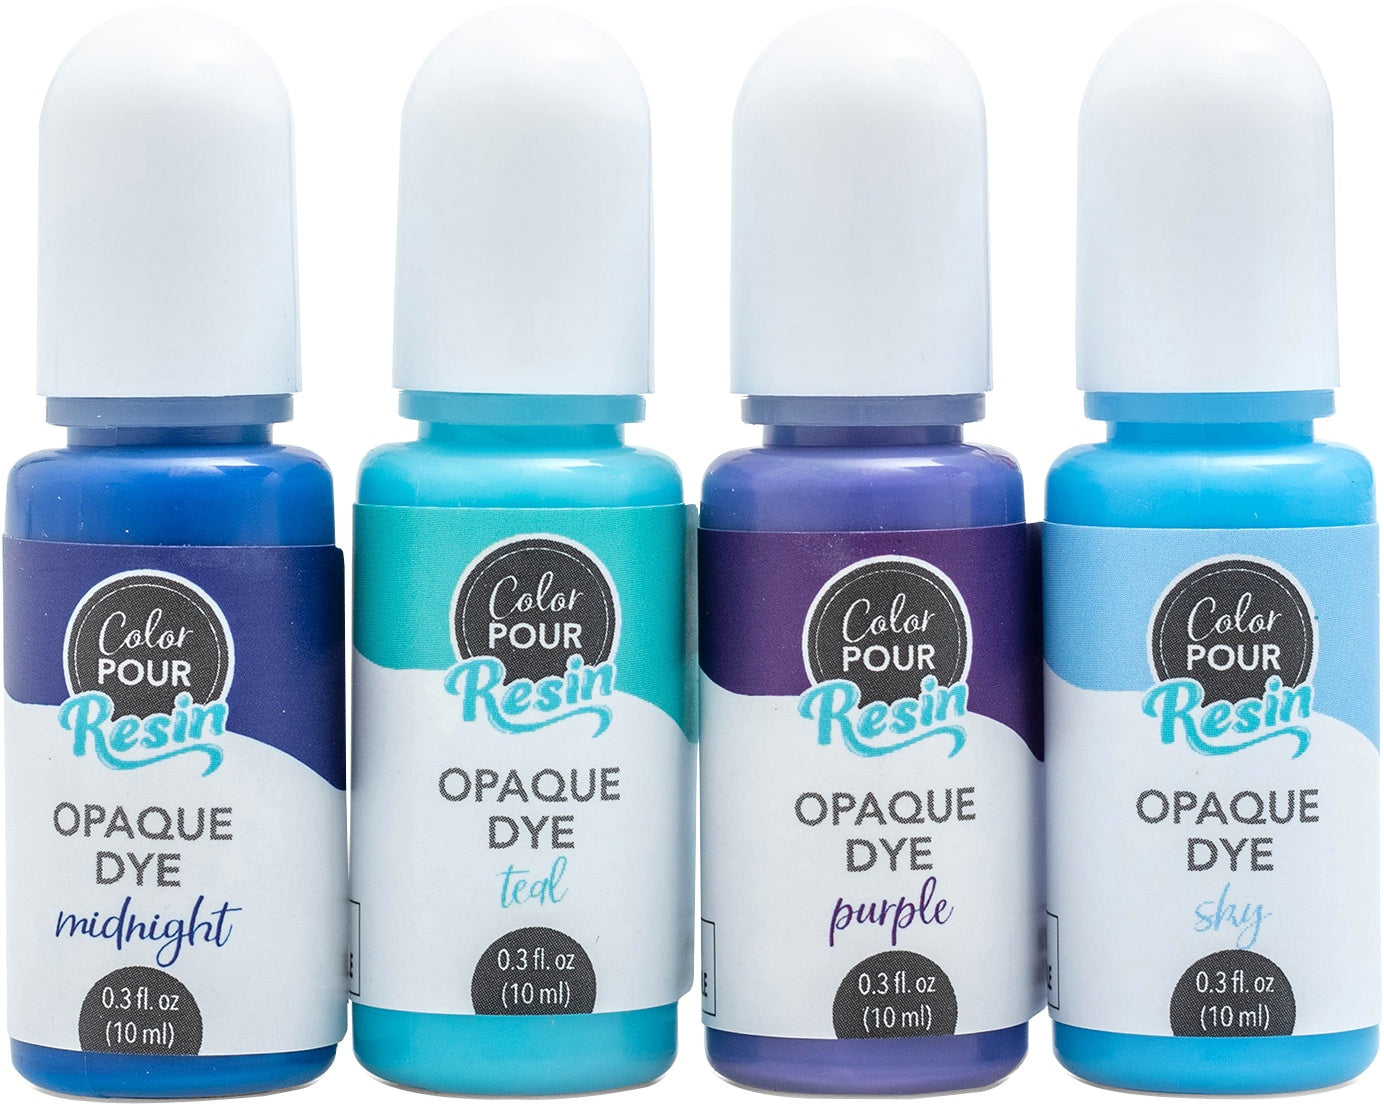 American Crafts Color Pour Resin Opaque Dye-Galaxy